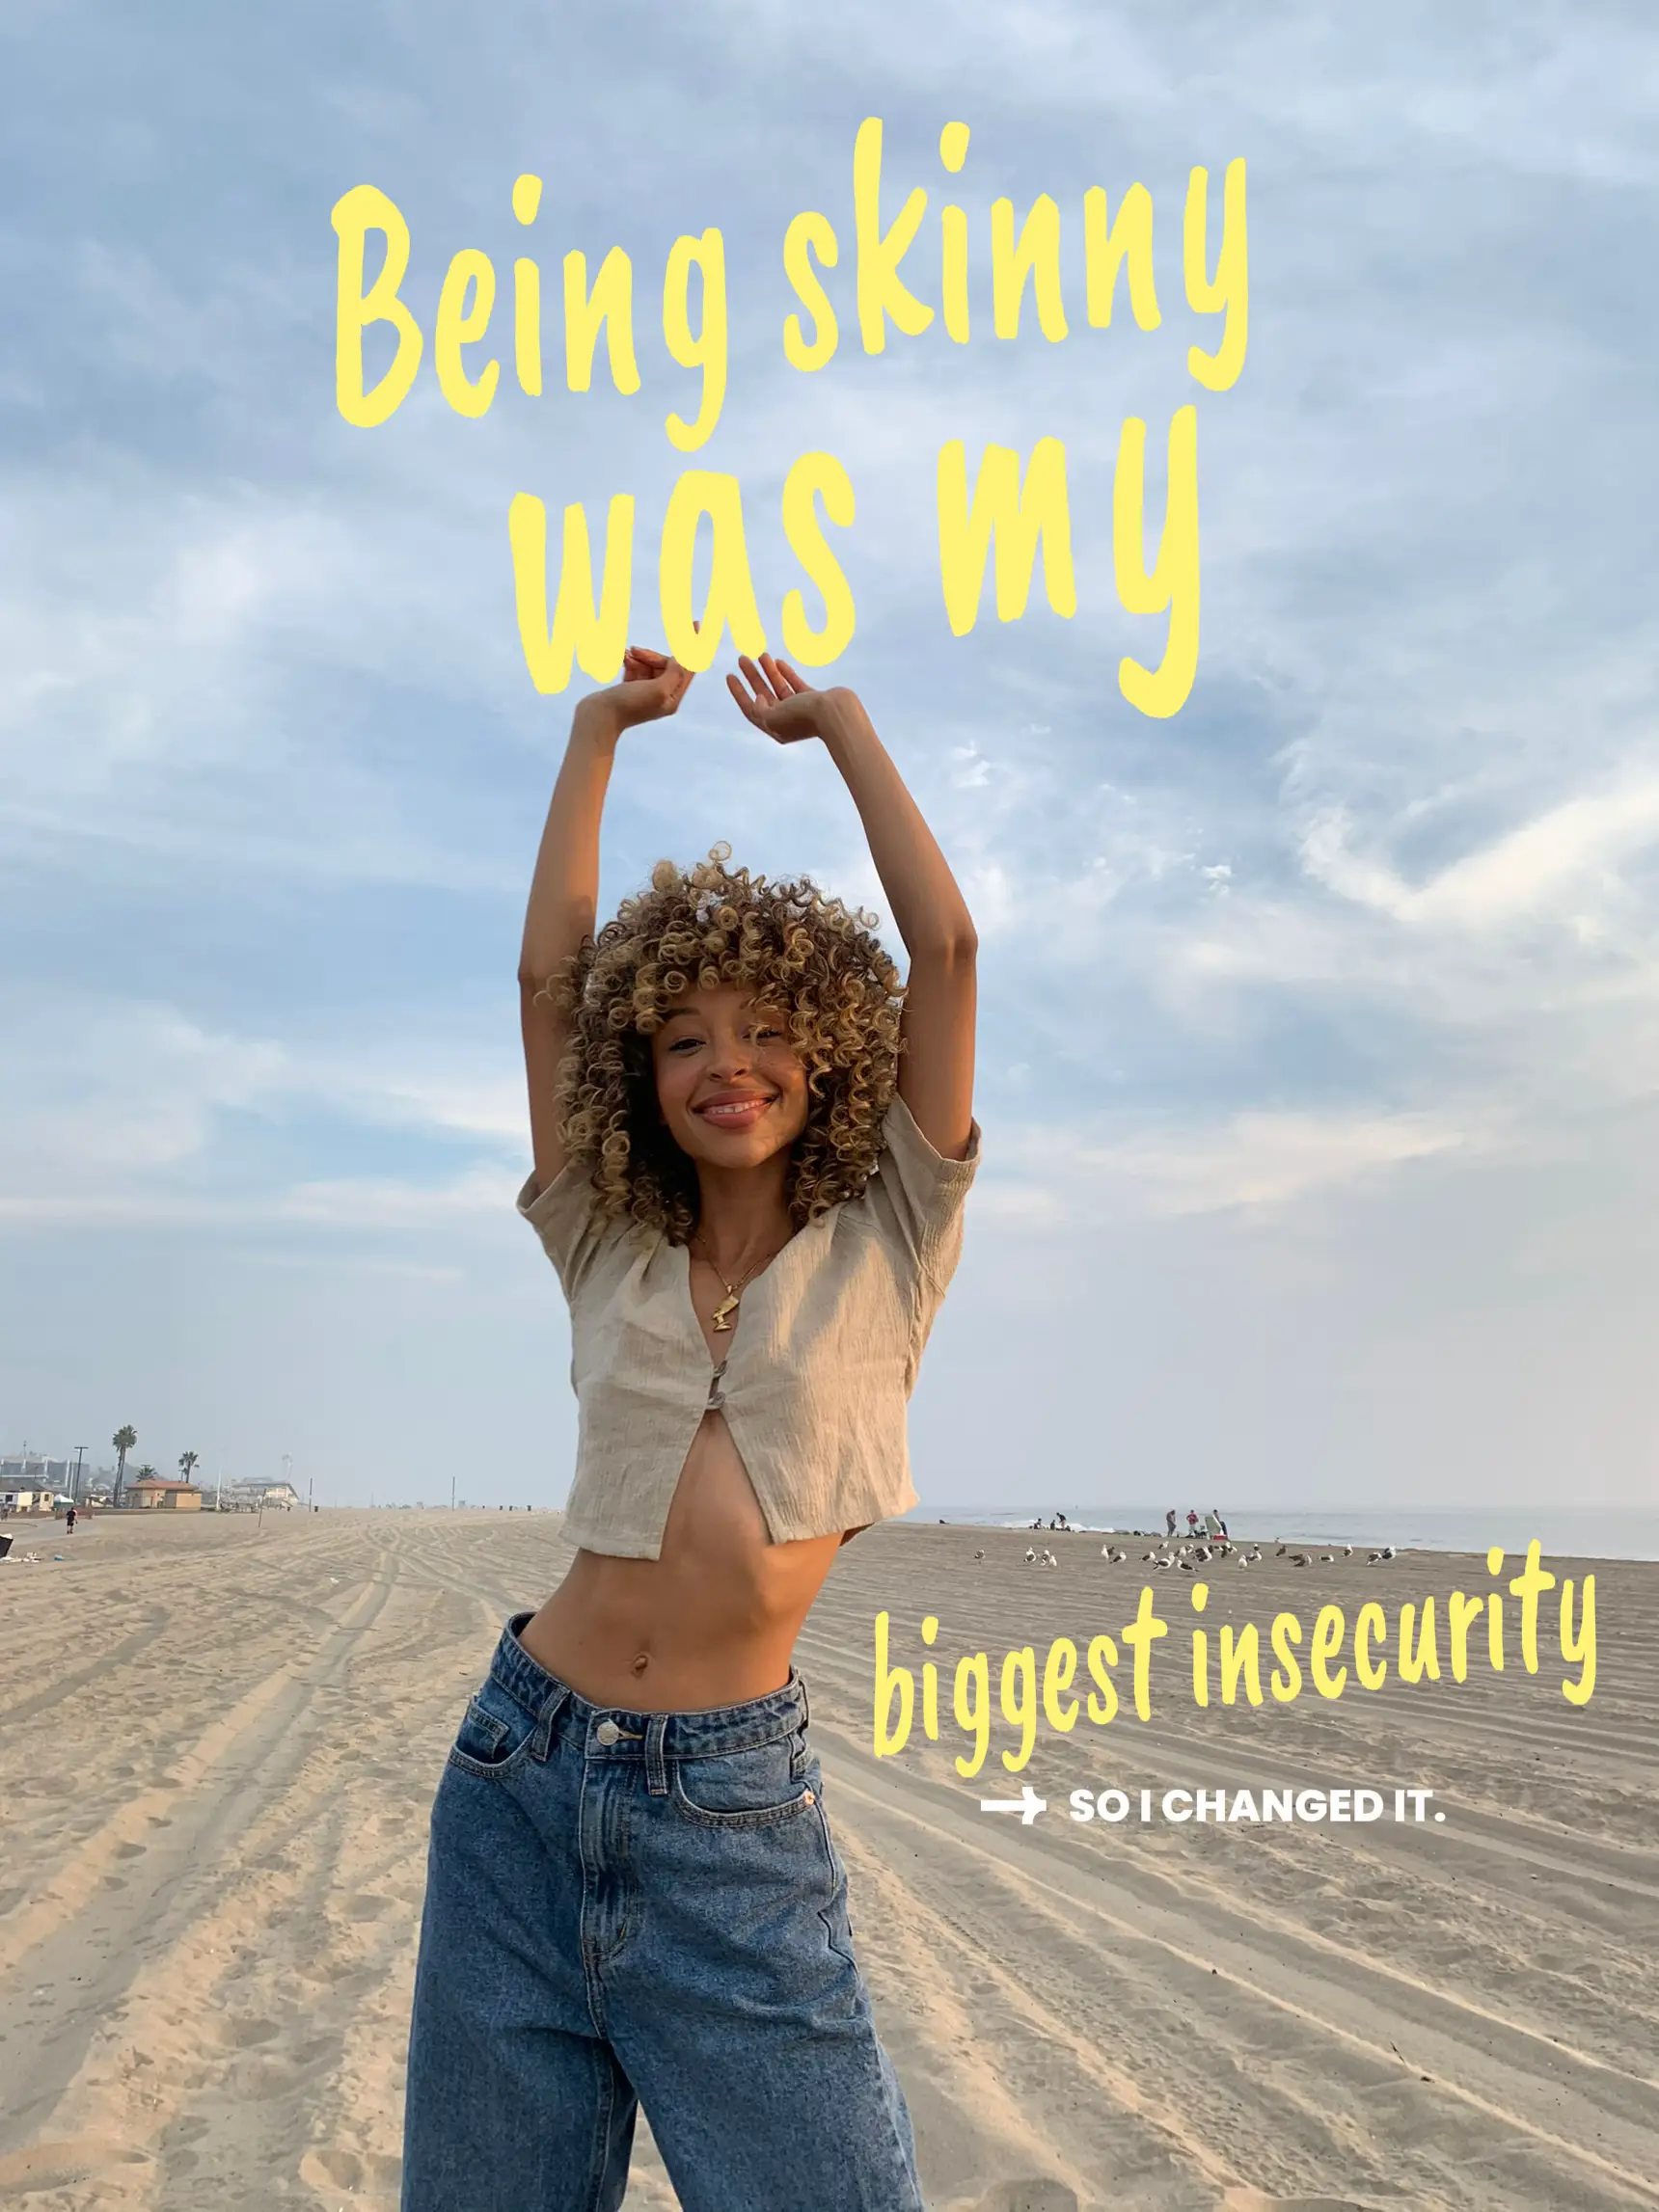 Being skinny was my biggest insecurity.'s images